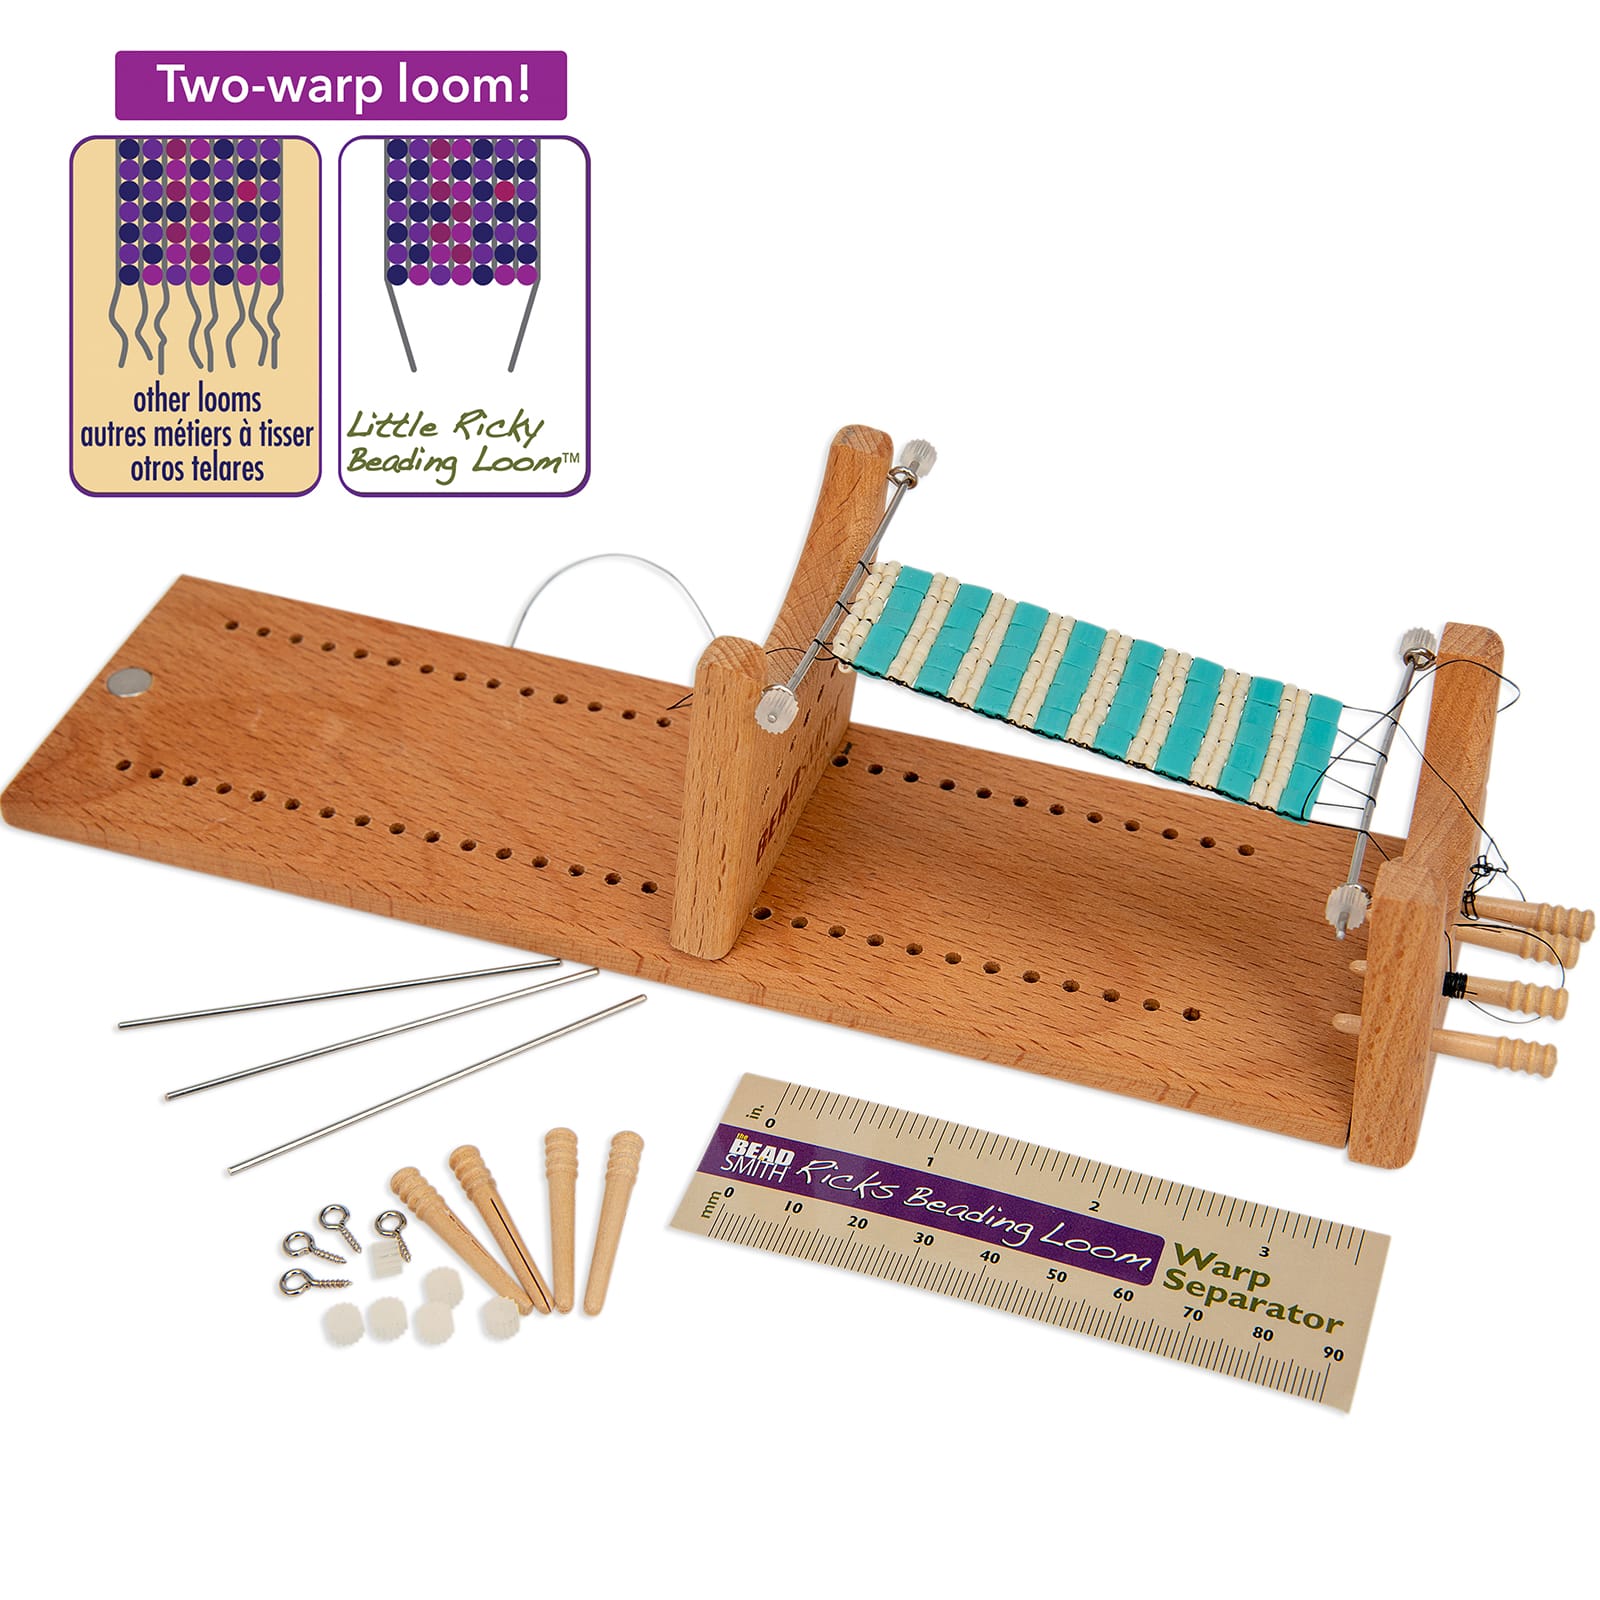 The Beadsmith Bead Loom Kit For Beginners - Weave Necklaces